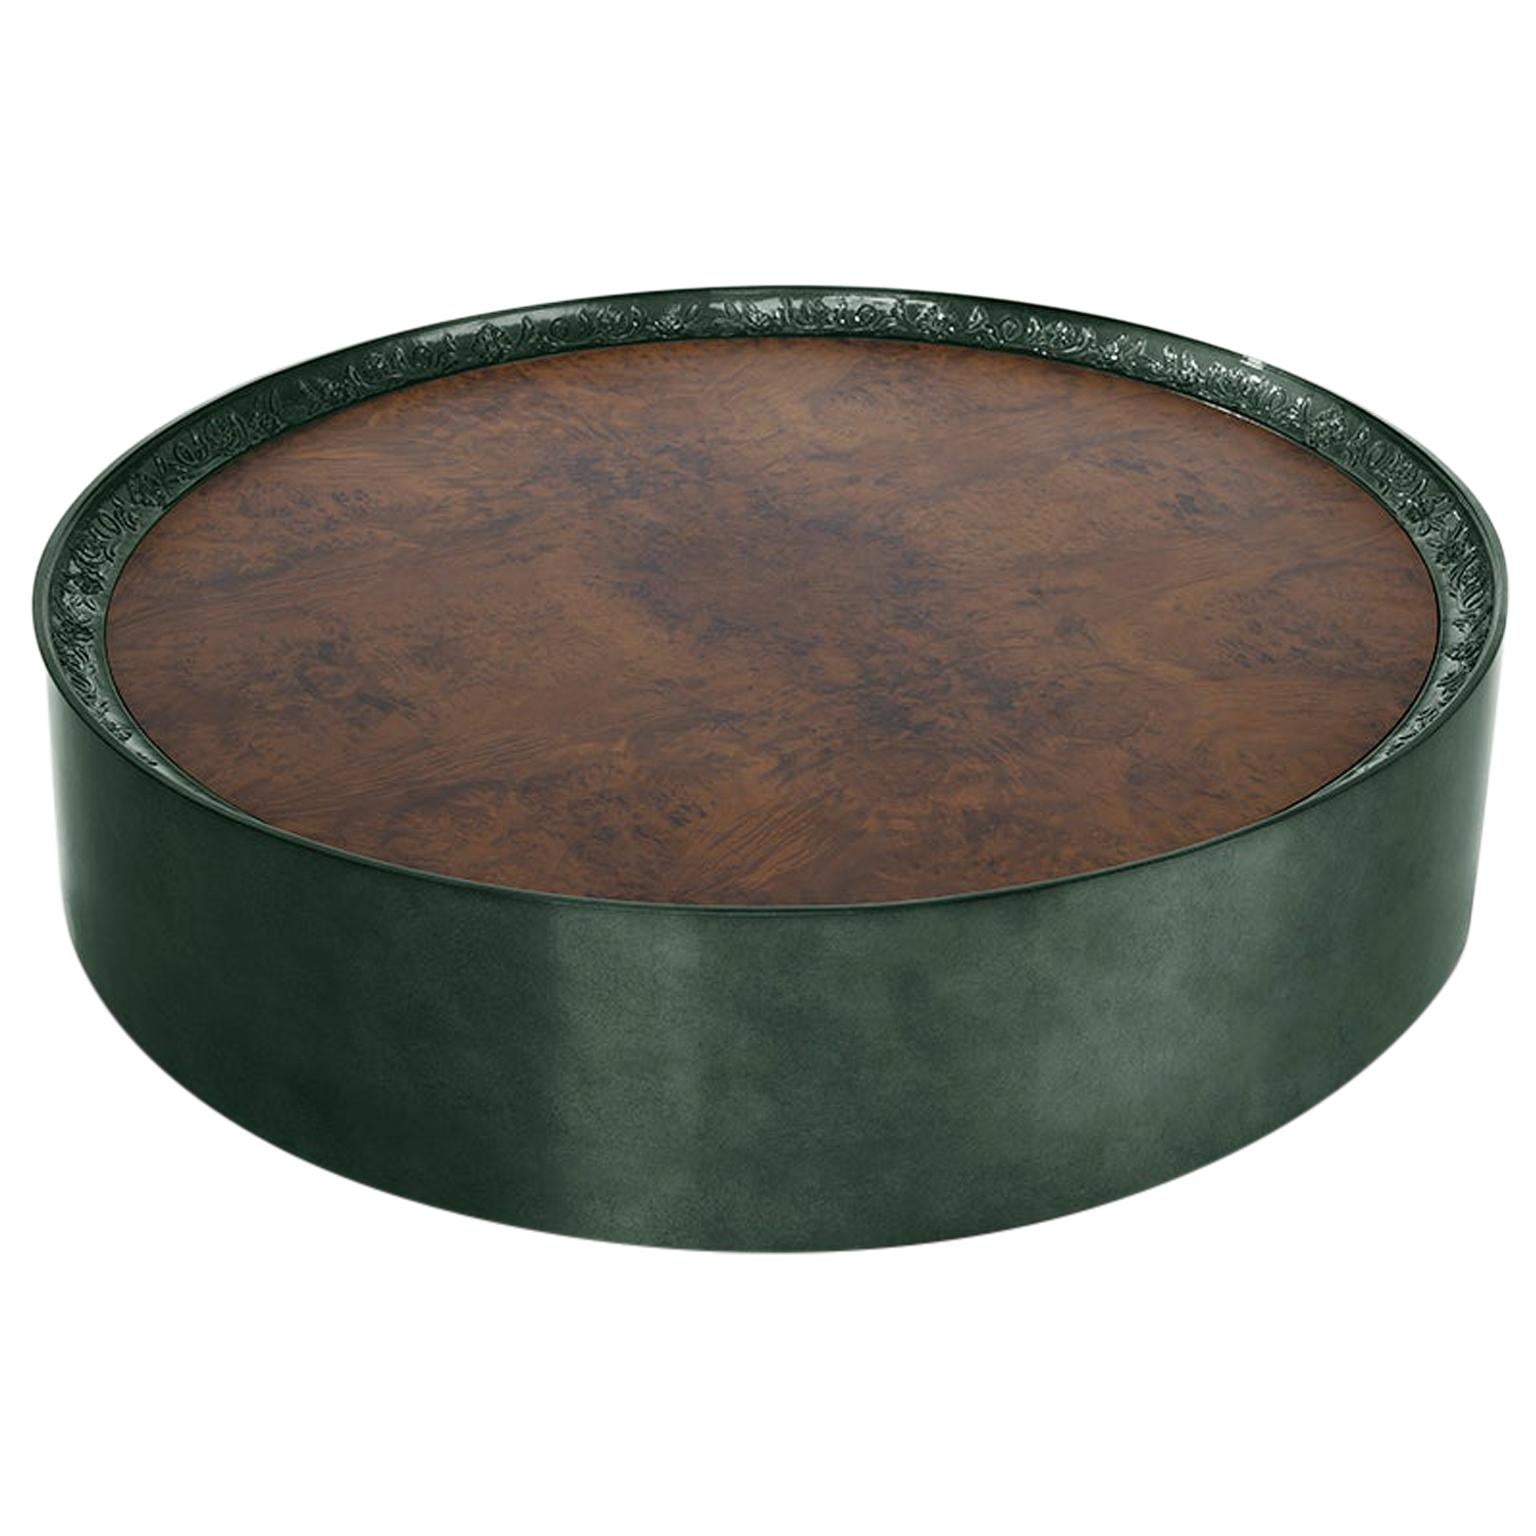 Modern Shy Green Center Table, Carved Wood with Silver Leaf and Wood Veneer Top